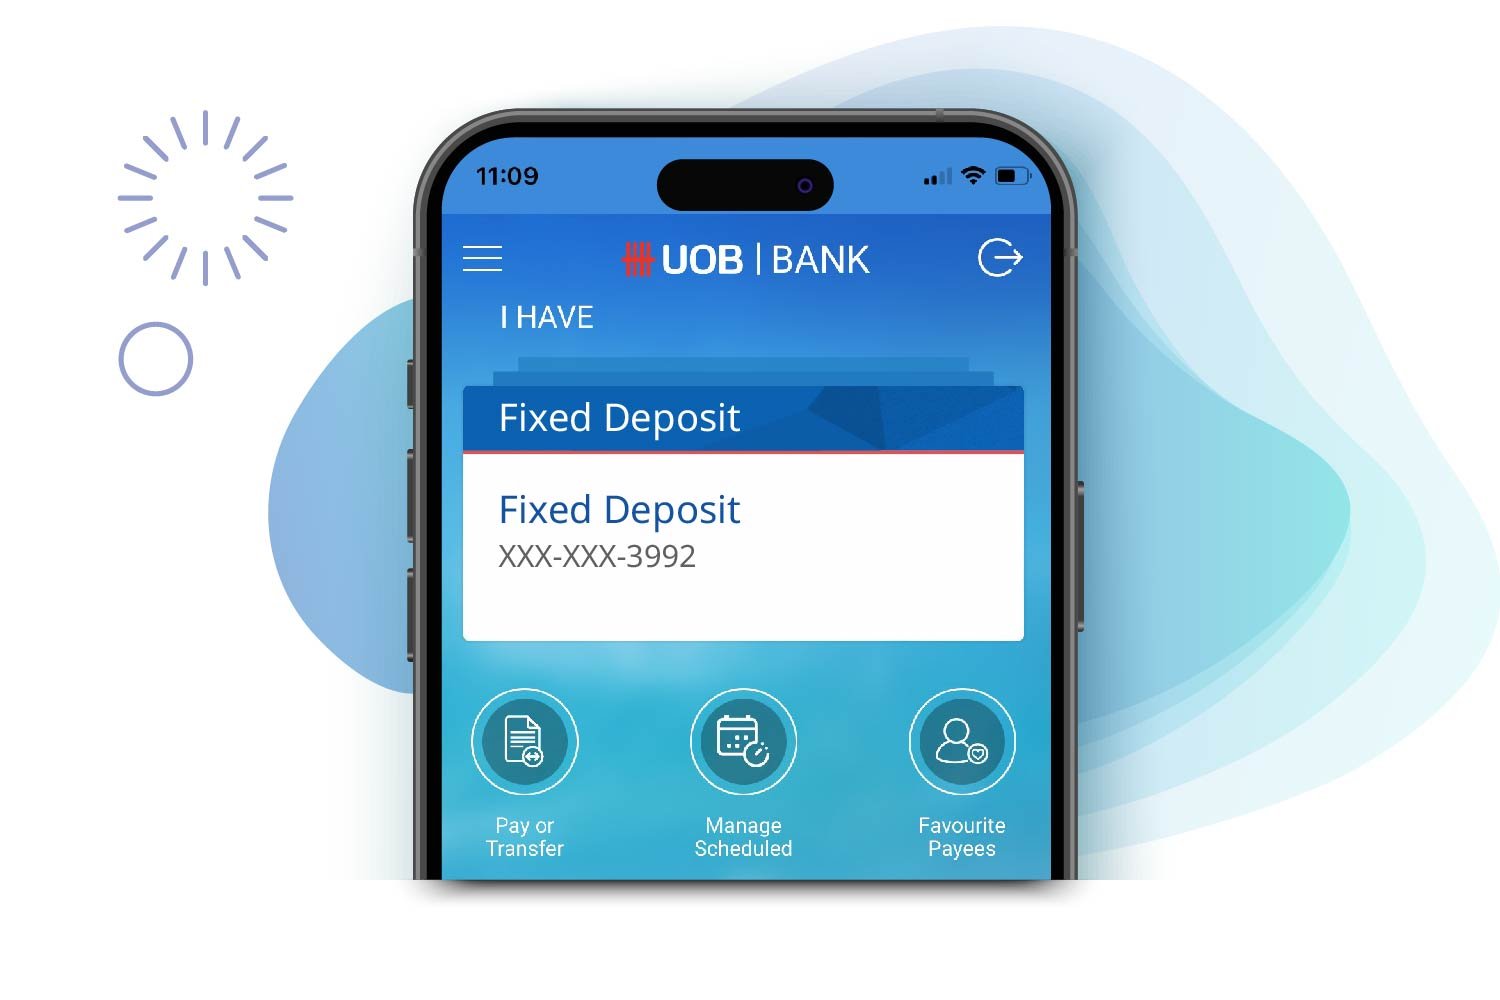 /Deposit or Withdraw Funds